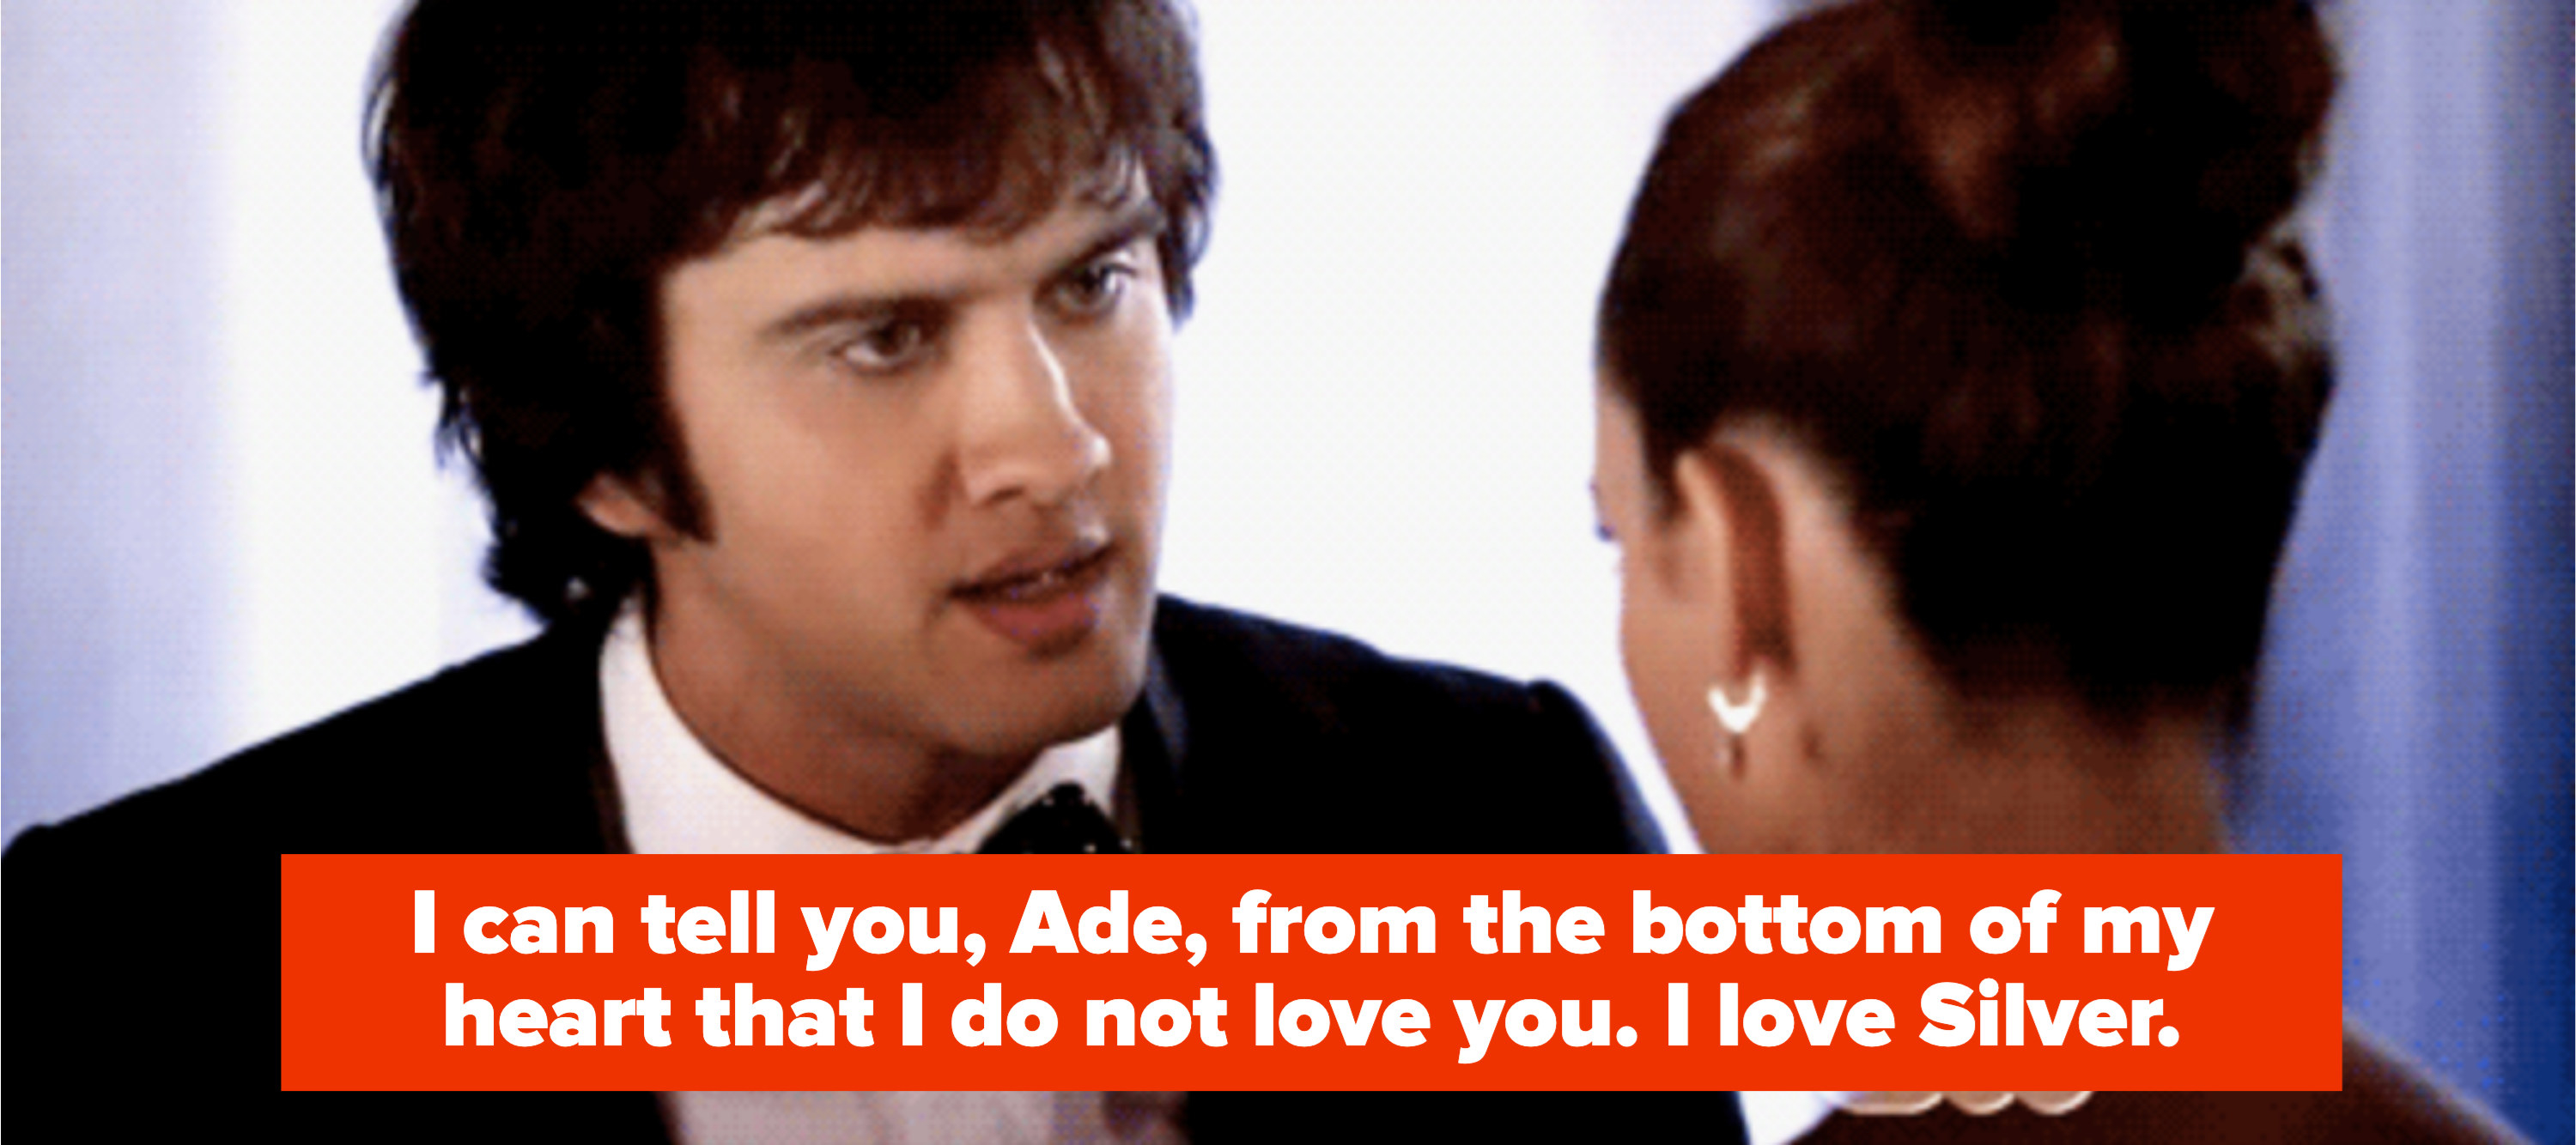 Navid telling Adrianna he loves Silver, not her